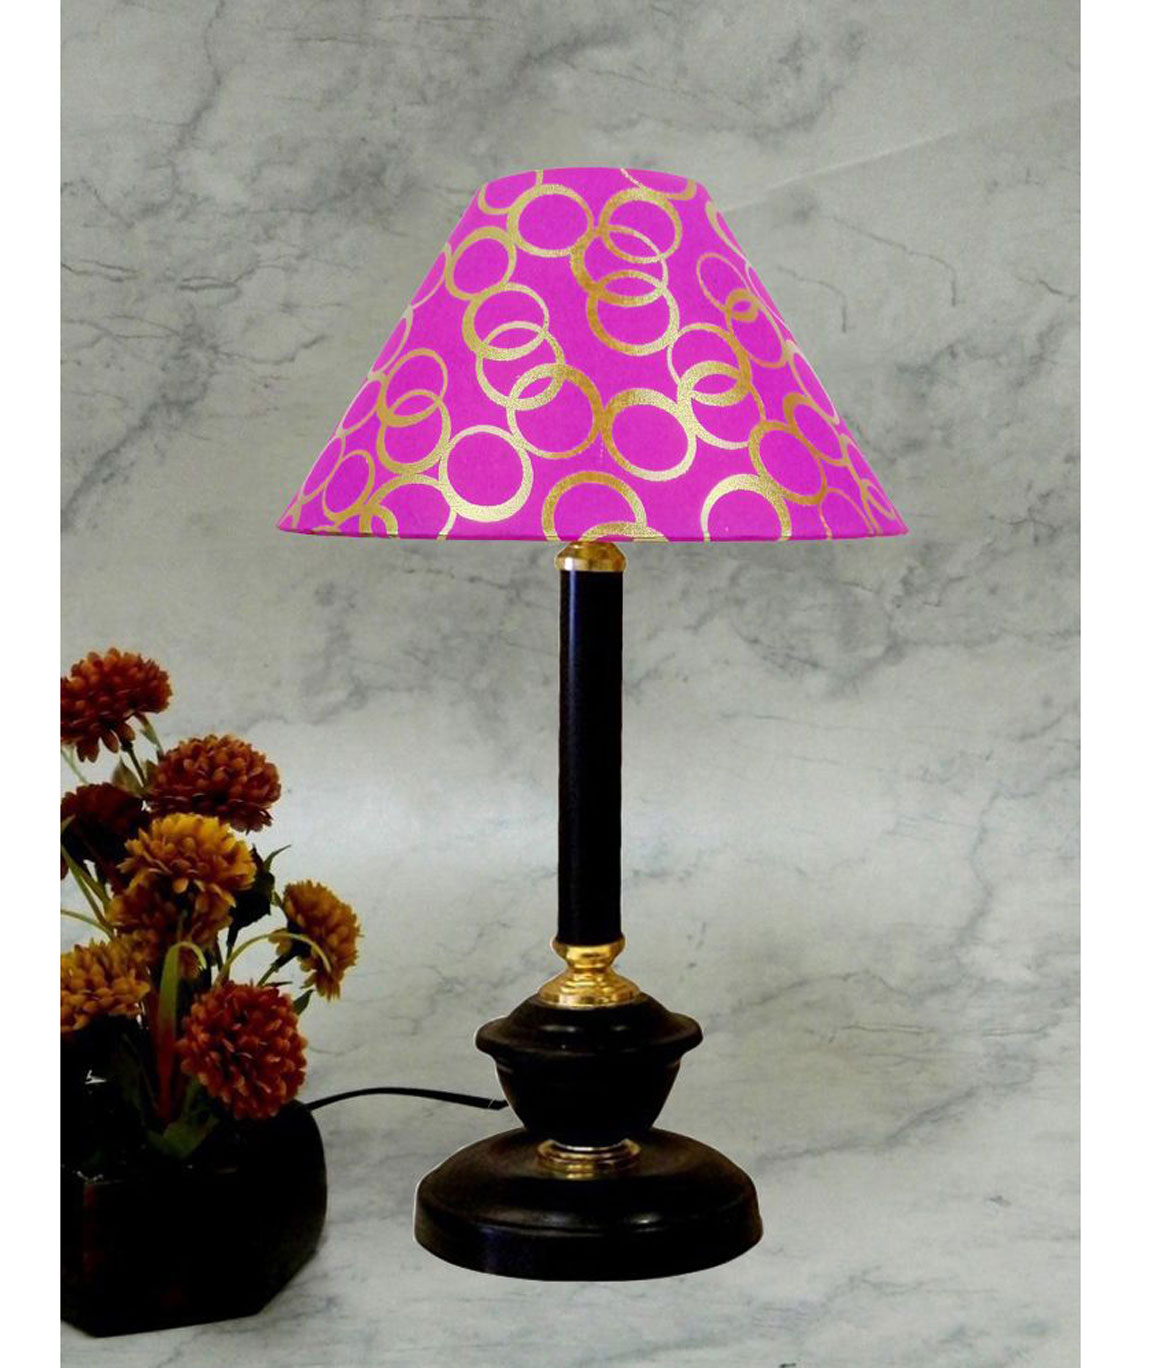 RDC Black Golden Table Lamp with 10 Inches Round Pink Golden Polka Dots Designer Lamp Shade